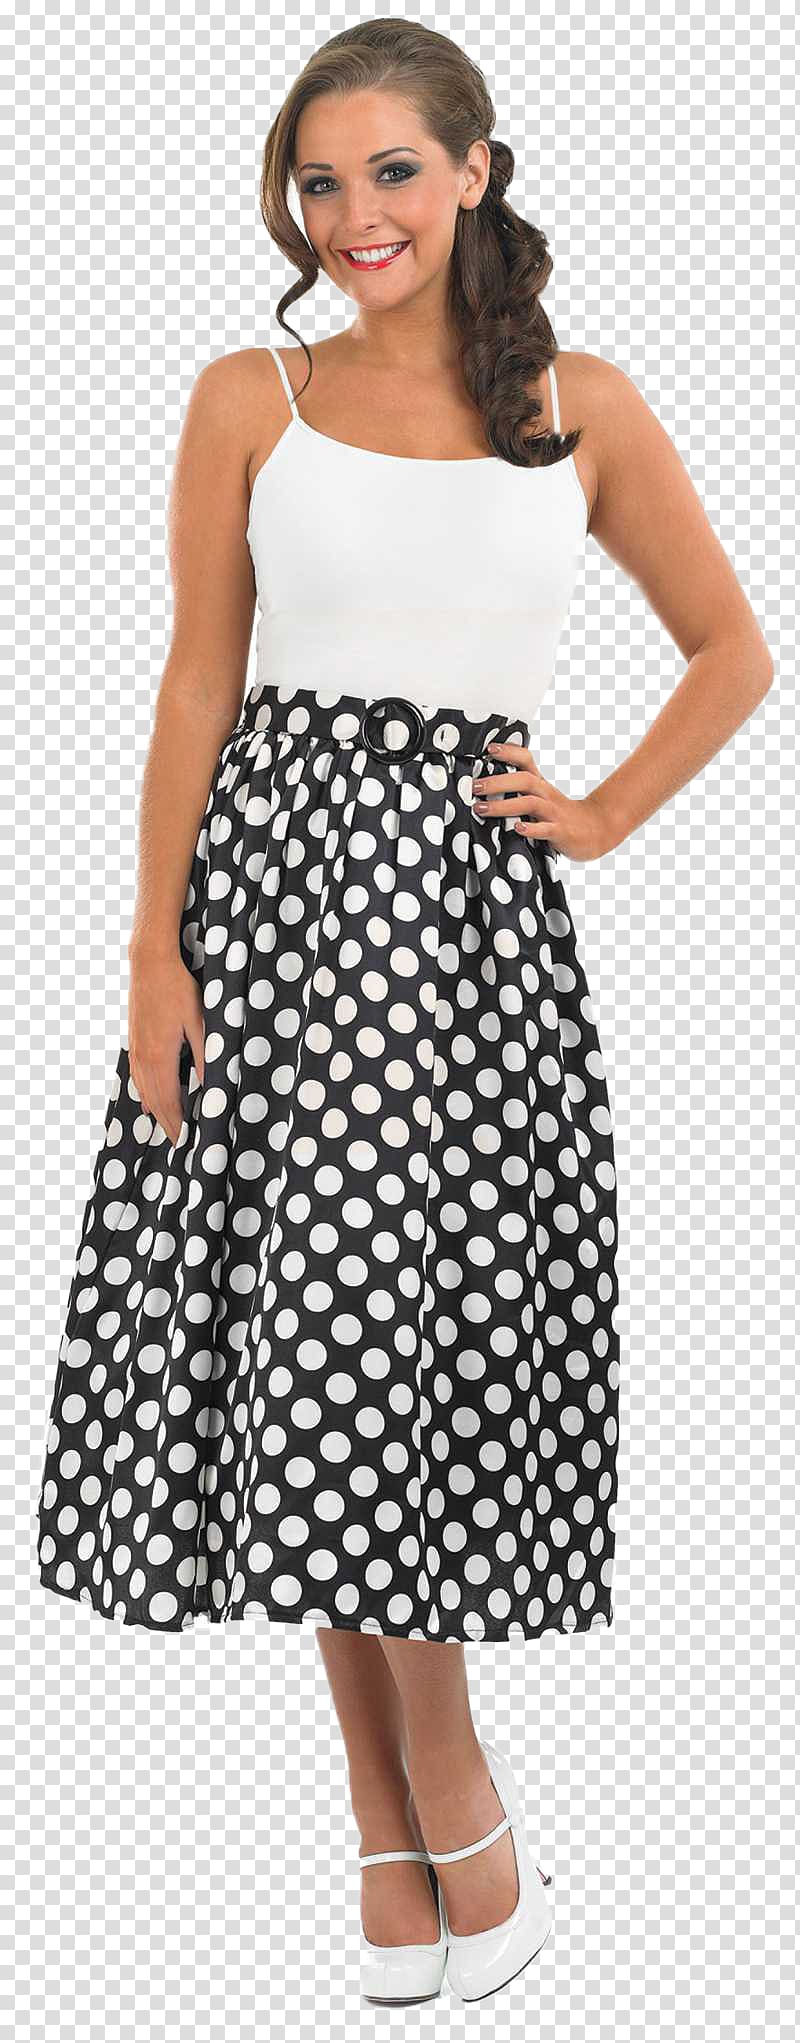 Polka dot 1950s Dress Skirt Costume, period costume transparent background PNG clipart